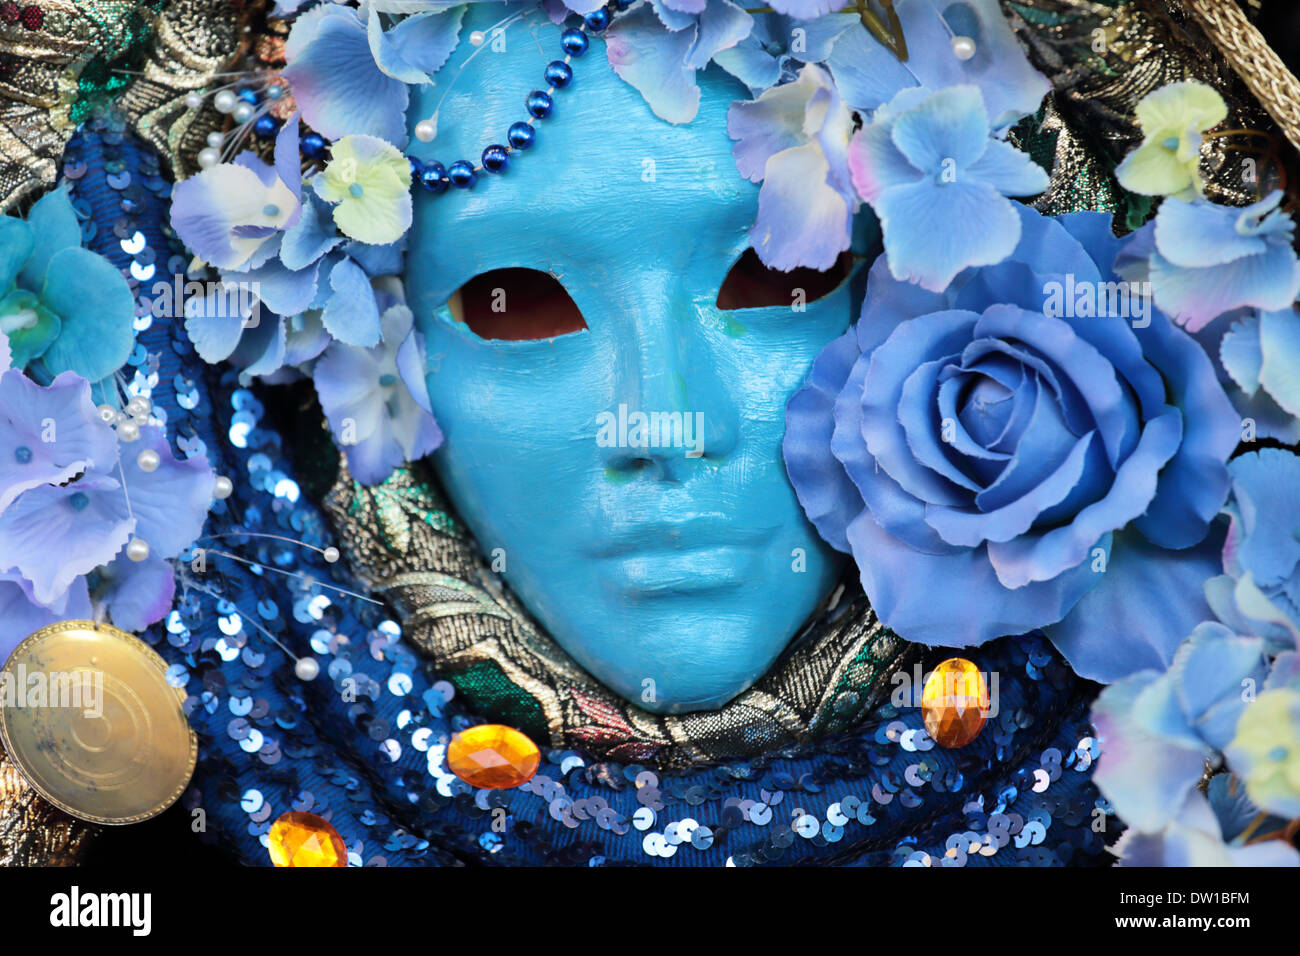 A blue mask with floral decorations exhibited during the traditional Carnival of Venice, Italy (2014 edition) Stock Photo